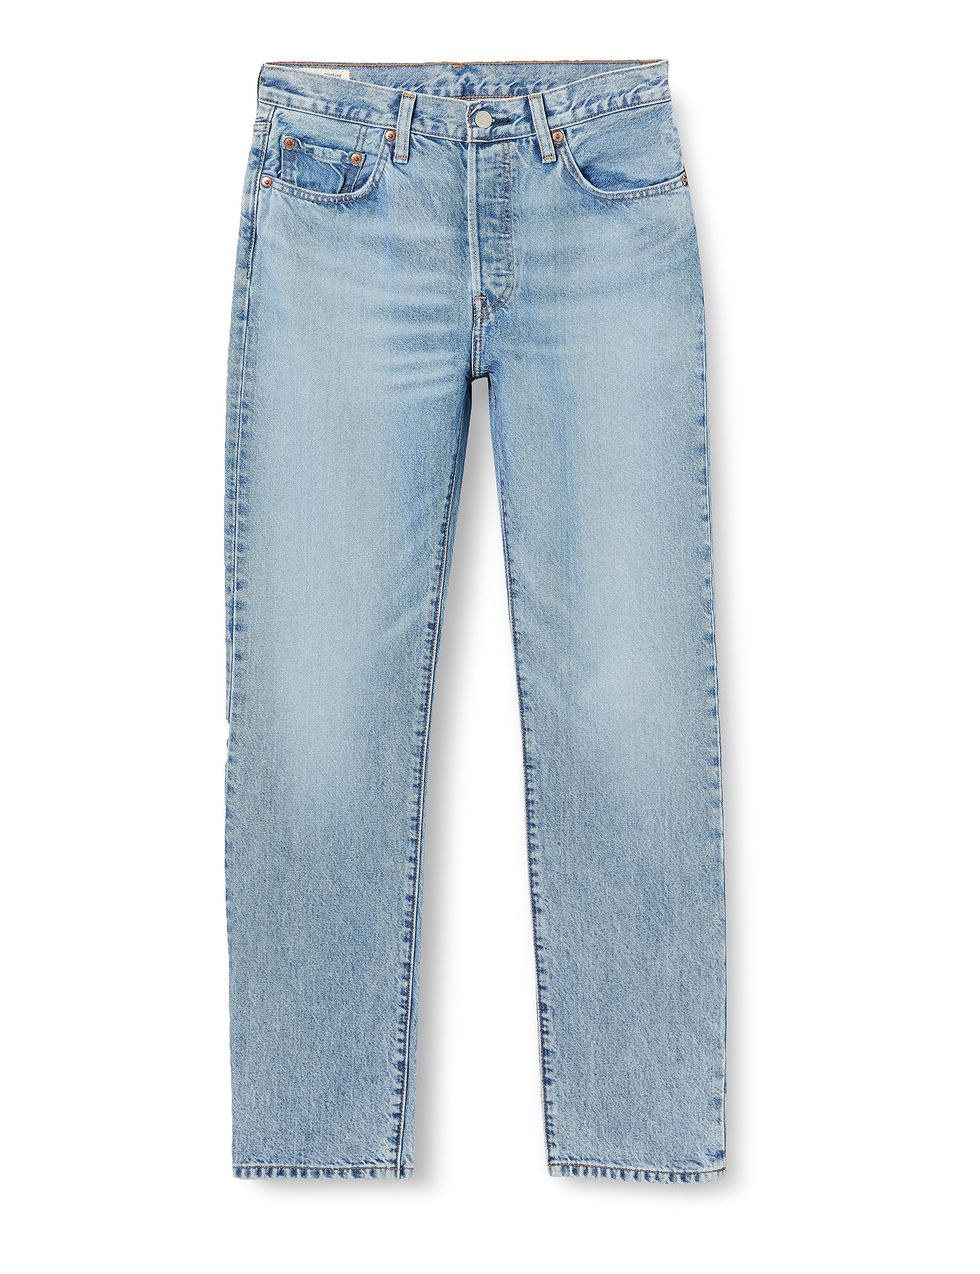 Classic 501 Jeans